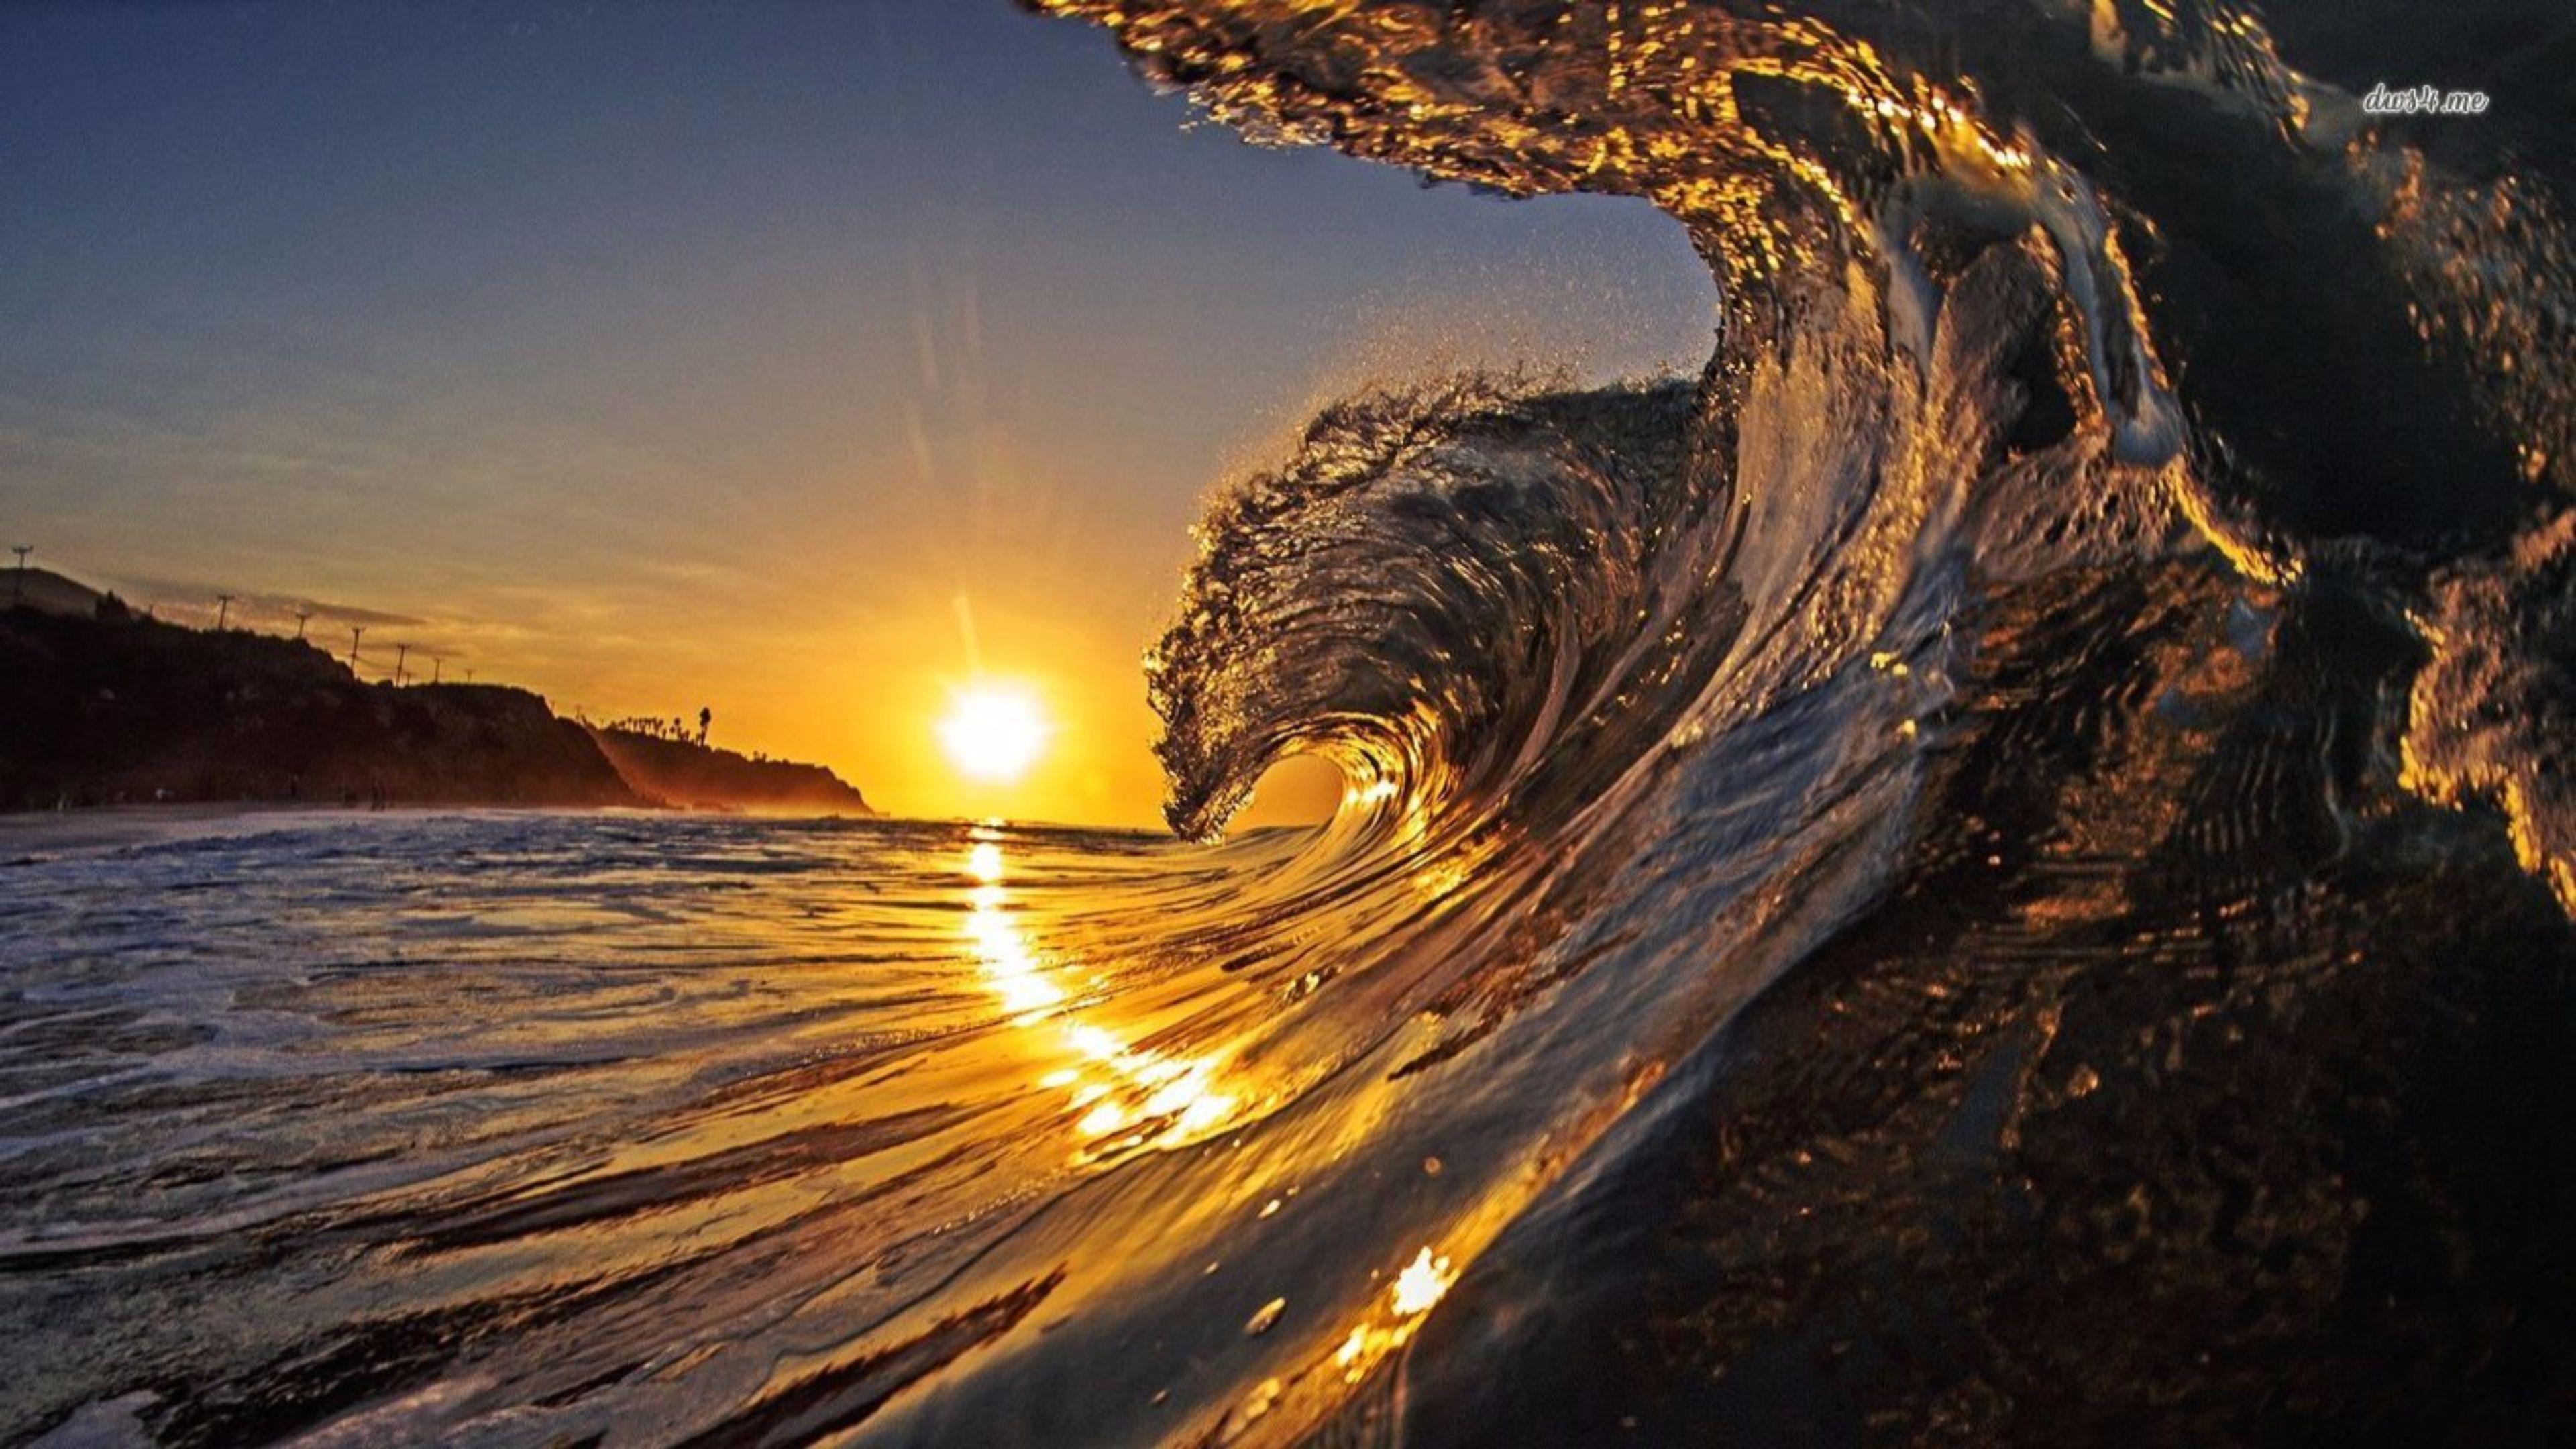 4k wallpaper 15 ULTRA HD Collections. Waves wallpaper, Sunset wallpaper, Sunset waves